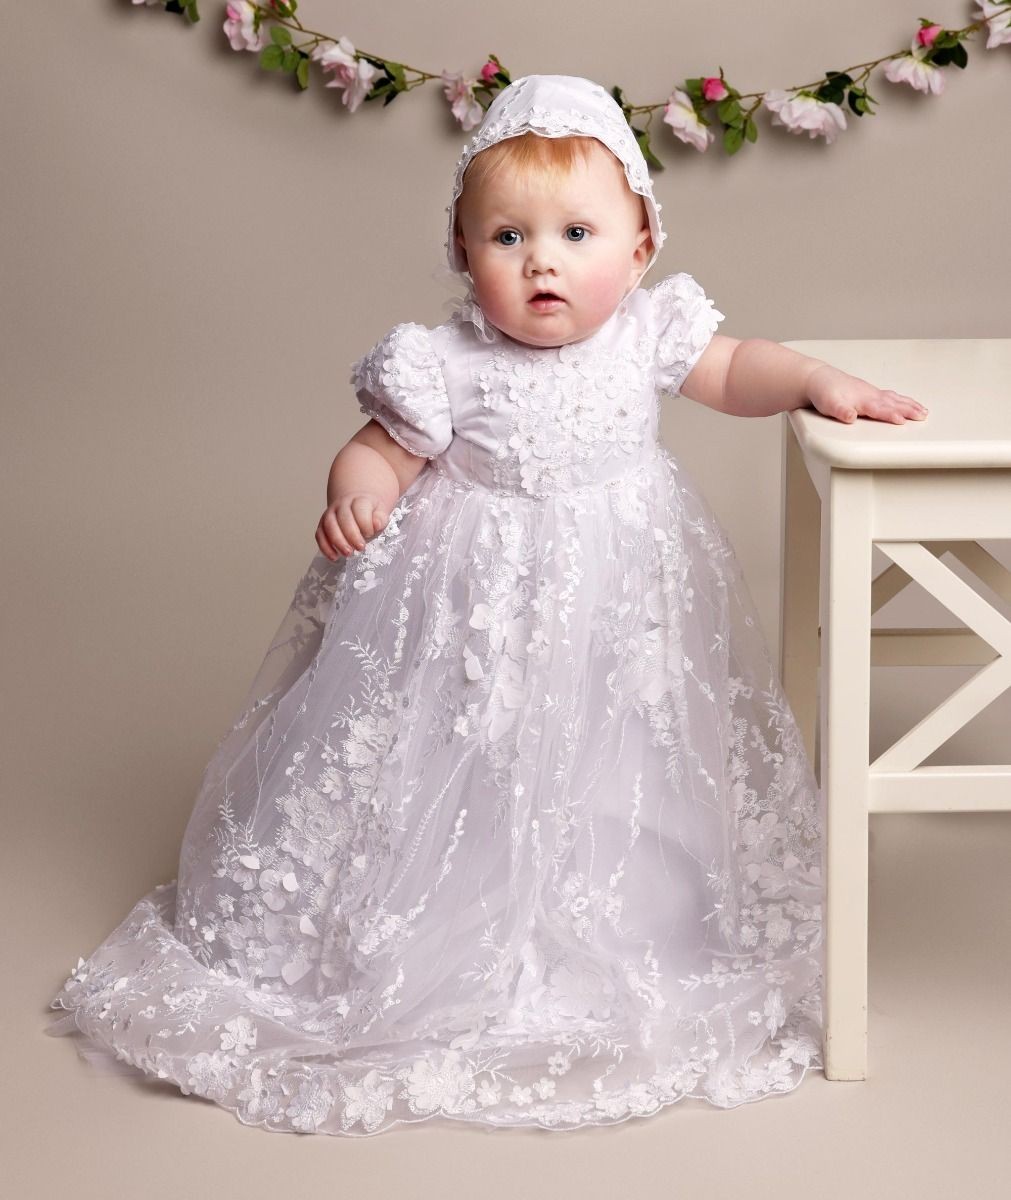 Baby Girls Lace Heirloom Christening Gown & Bonnet - RACHEAL - White